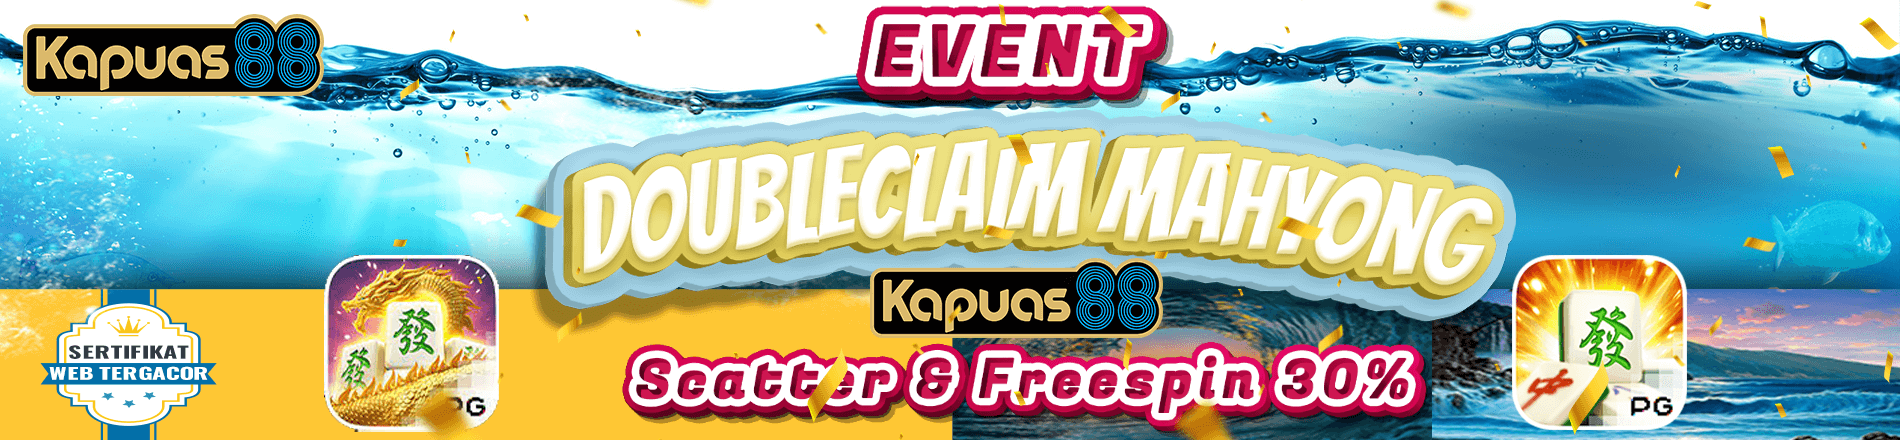 EVENT DOUBLECLAIM MAHYONG SCATTER & FREESPIN 30% KAPUAS88